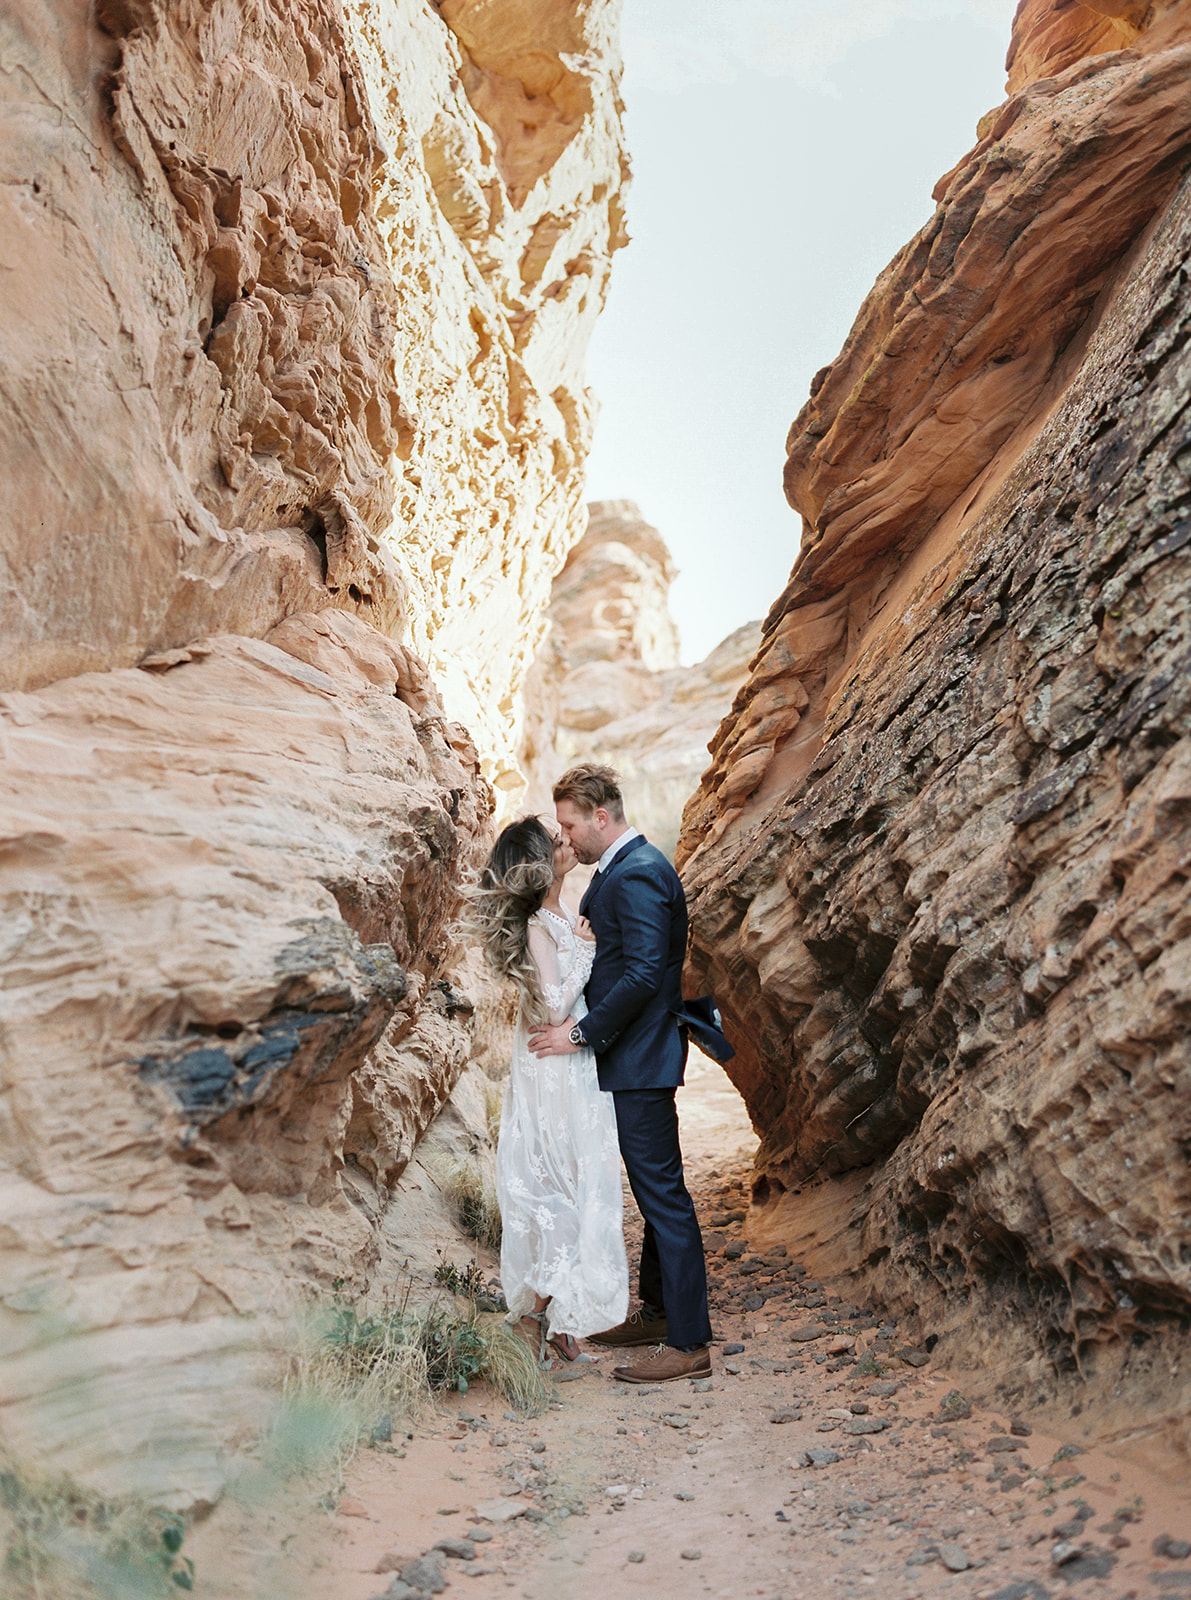 Bride and groom kissing in a slot canyon during their zion national park elopement